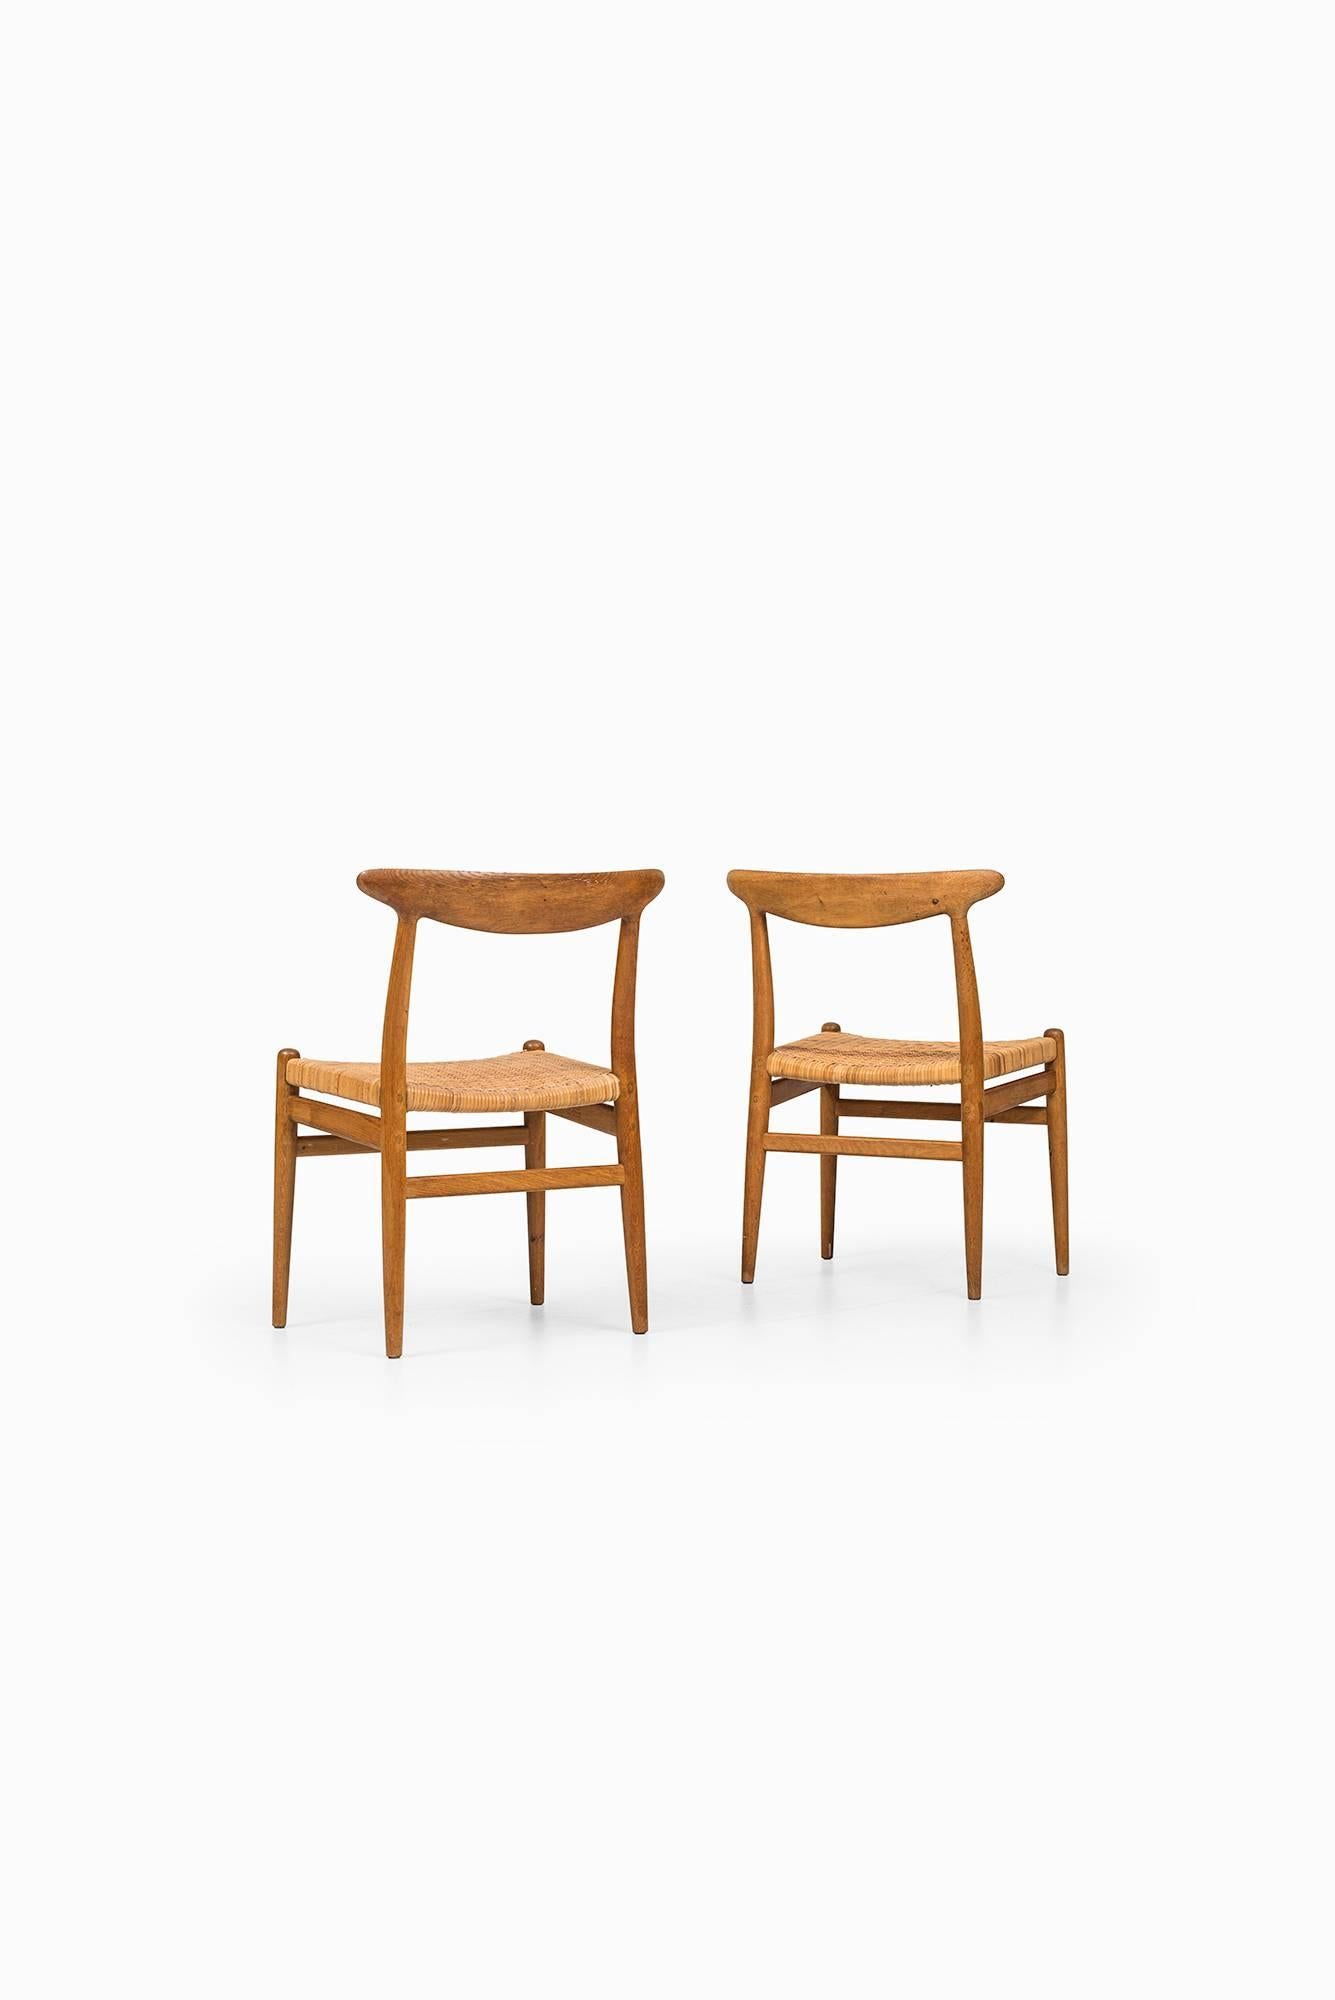 Danish Hans Wegner Set of Six Dining Chairs Model W2 Produced by C.M Madsen in Denmark